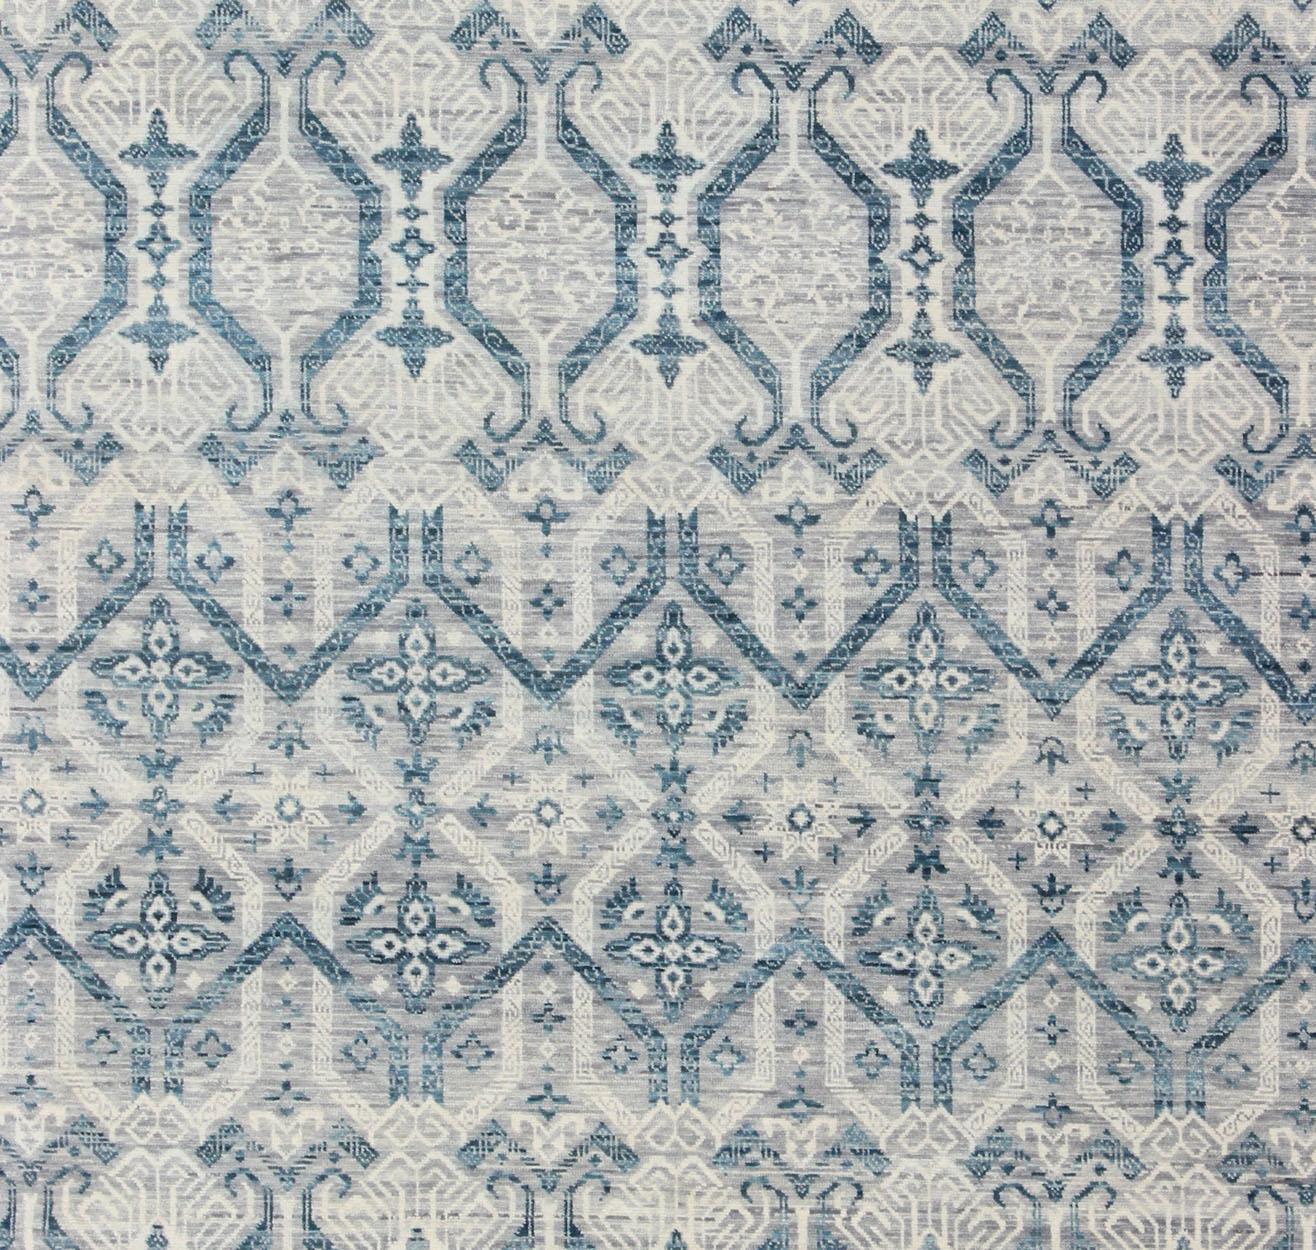 Modern Geometric All-Over Transitional Rug in Shades of Blue, Gray & Ivory